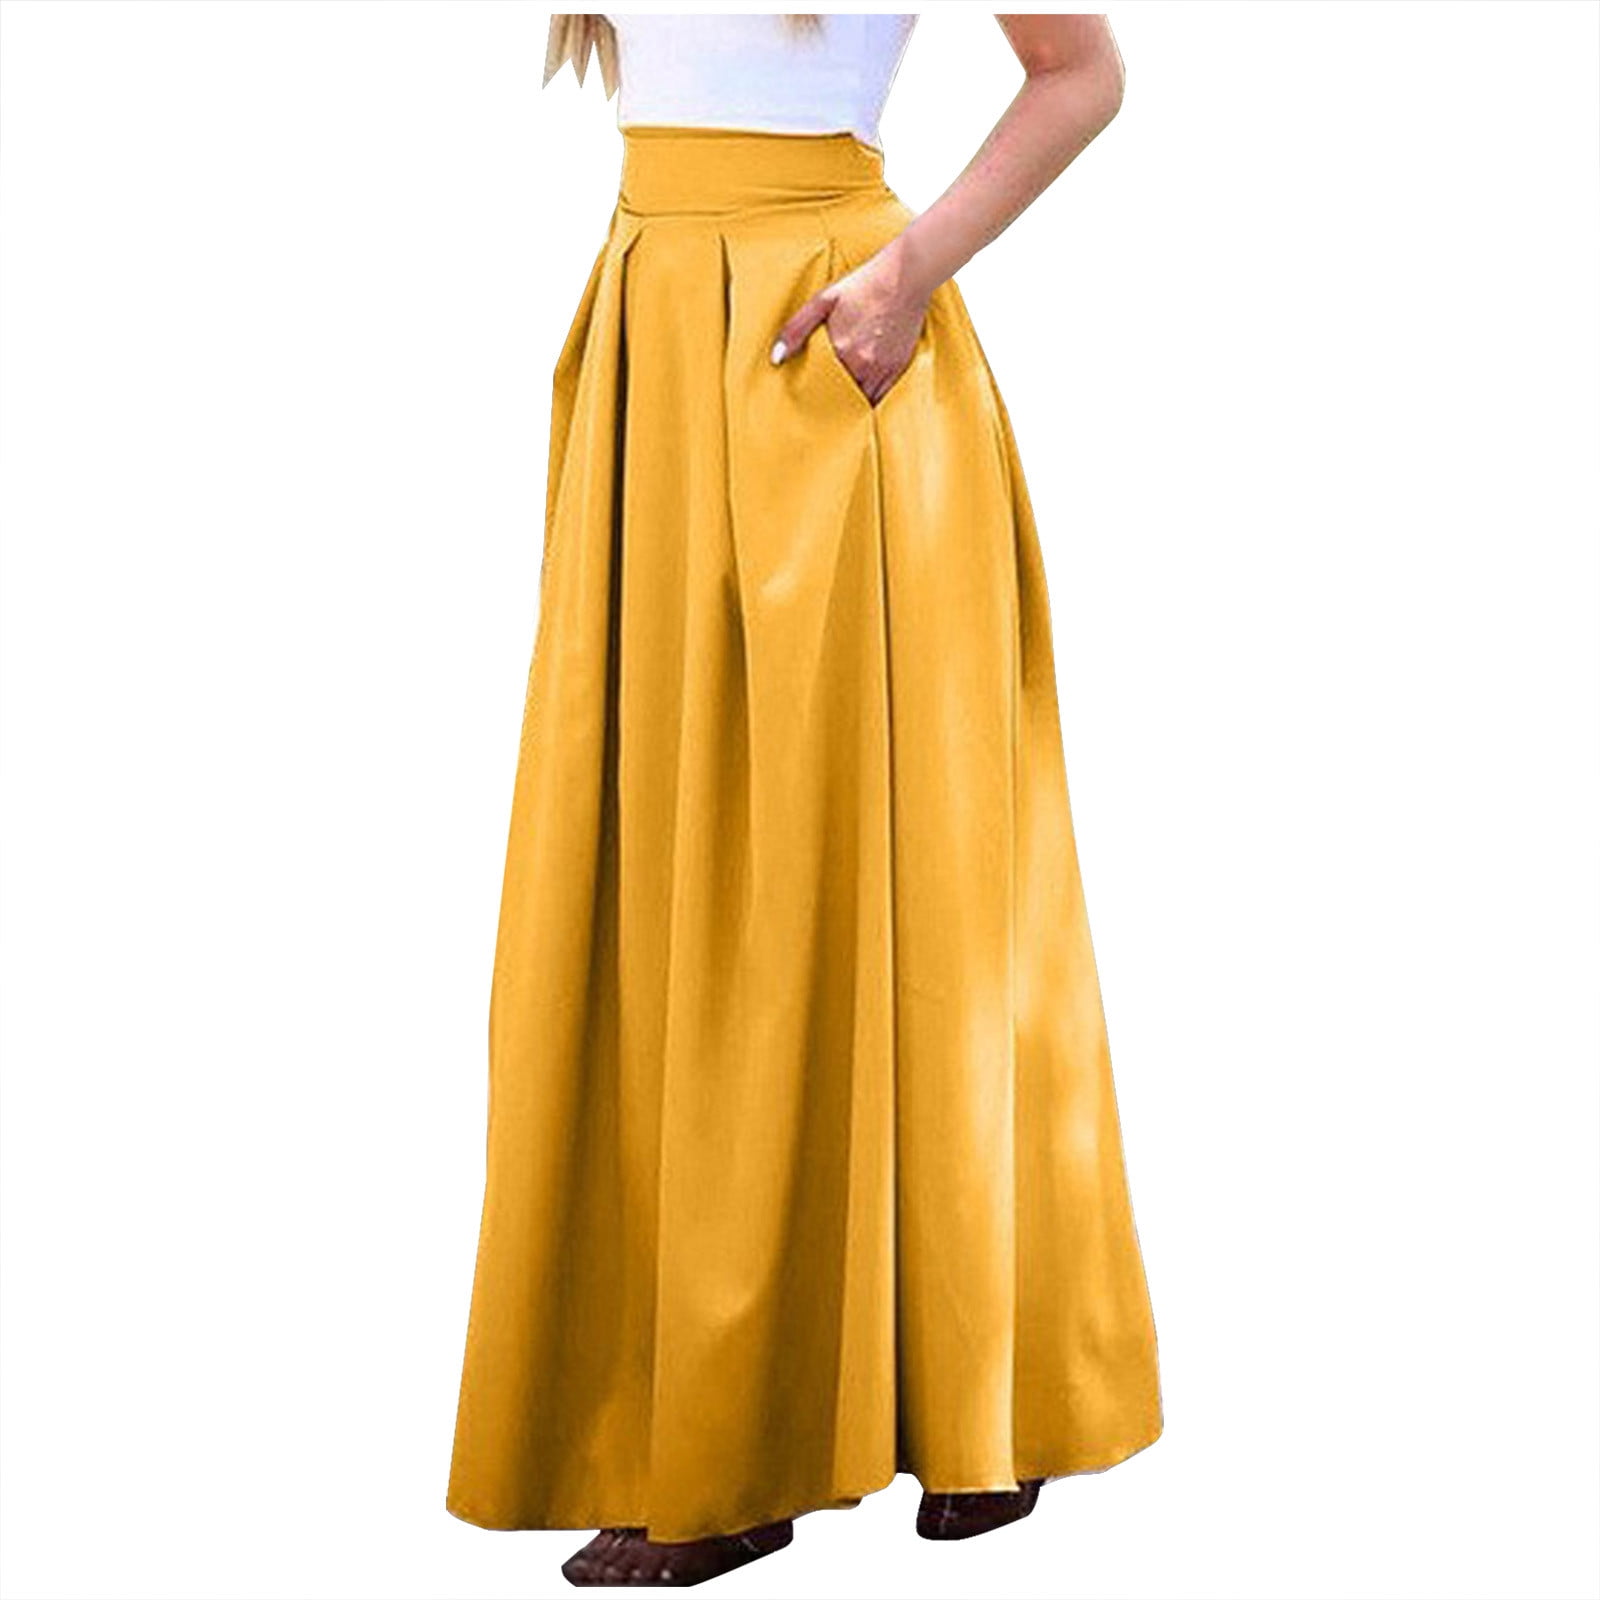 Women's High Waisted Long Skirt Solid Color Casual Pleated A-Line Flowy ...